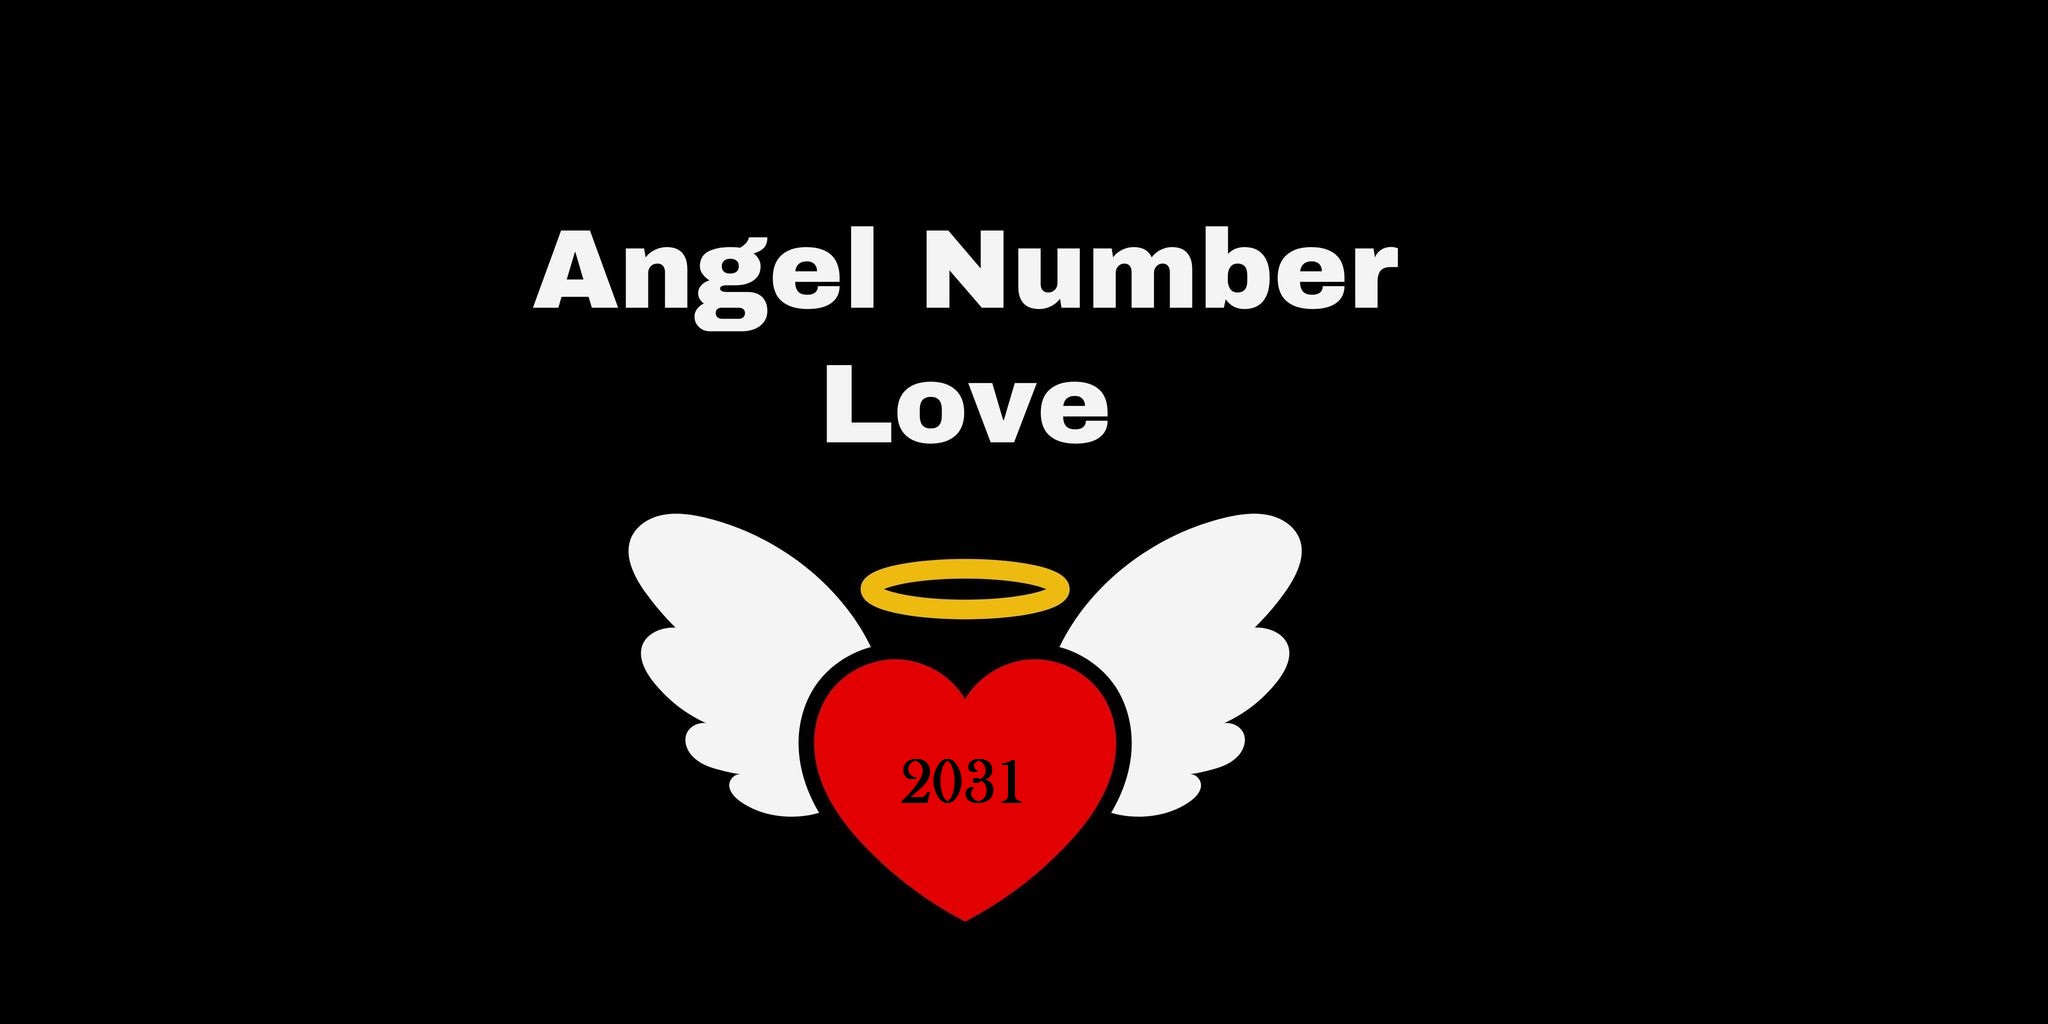 2031 Angel Number Meaning In Love